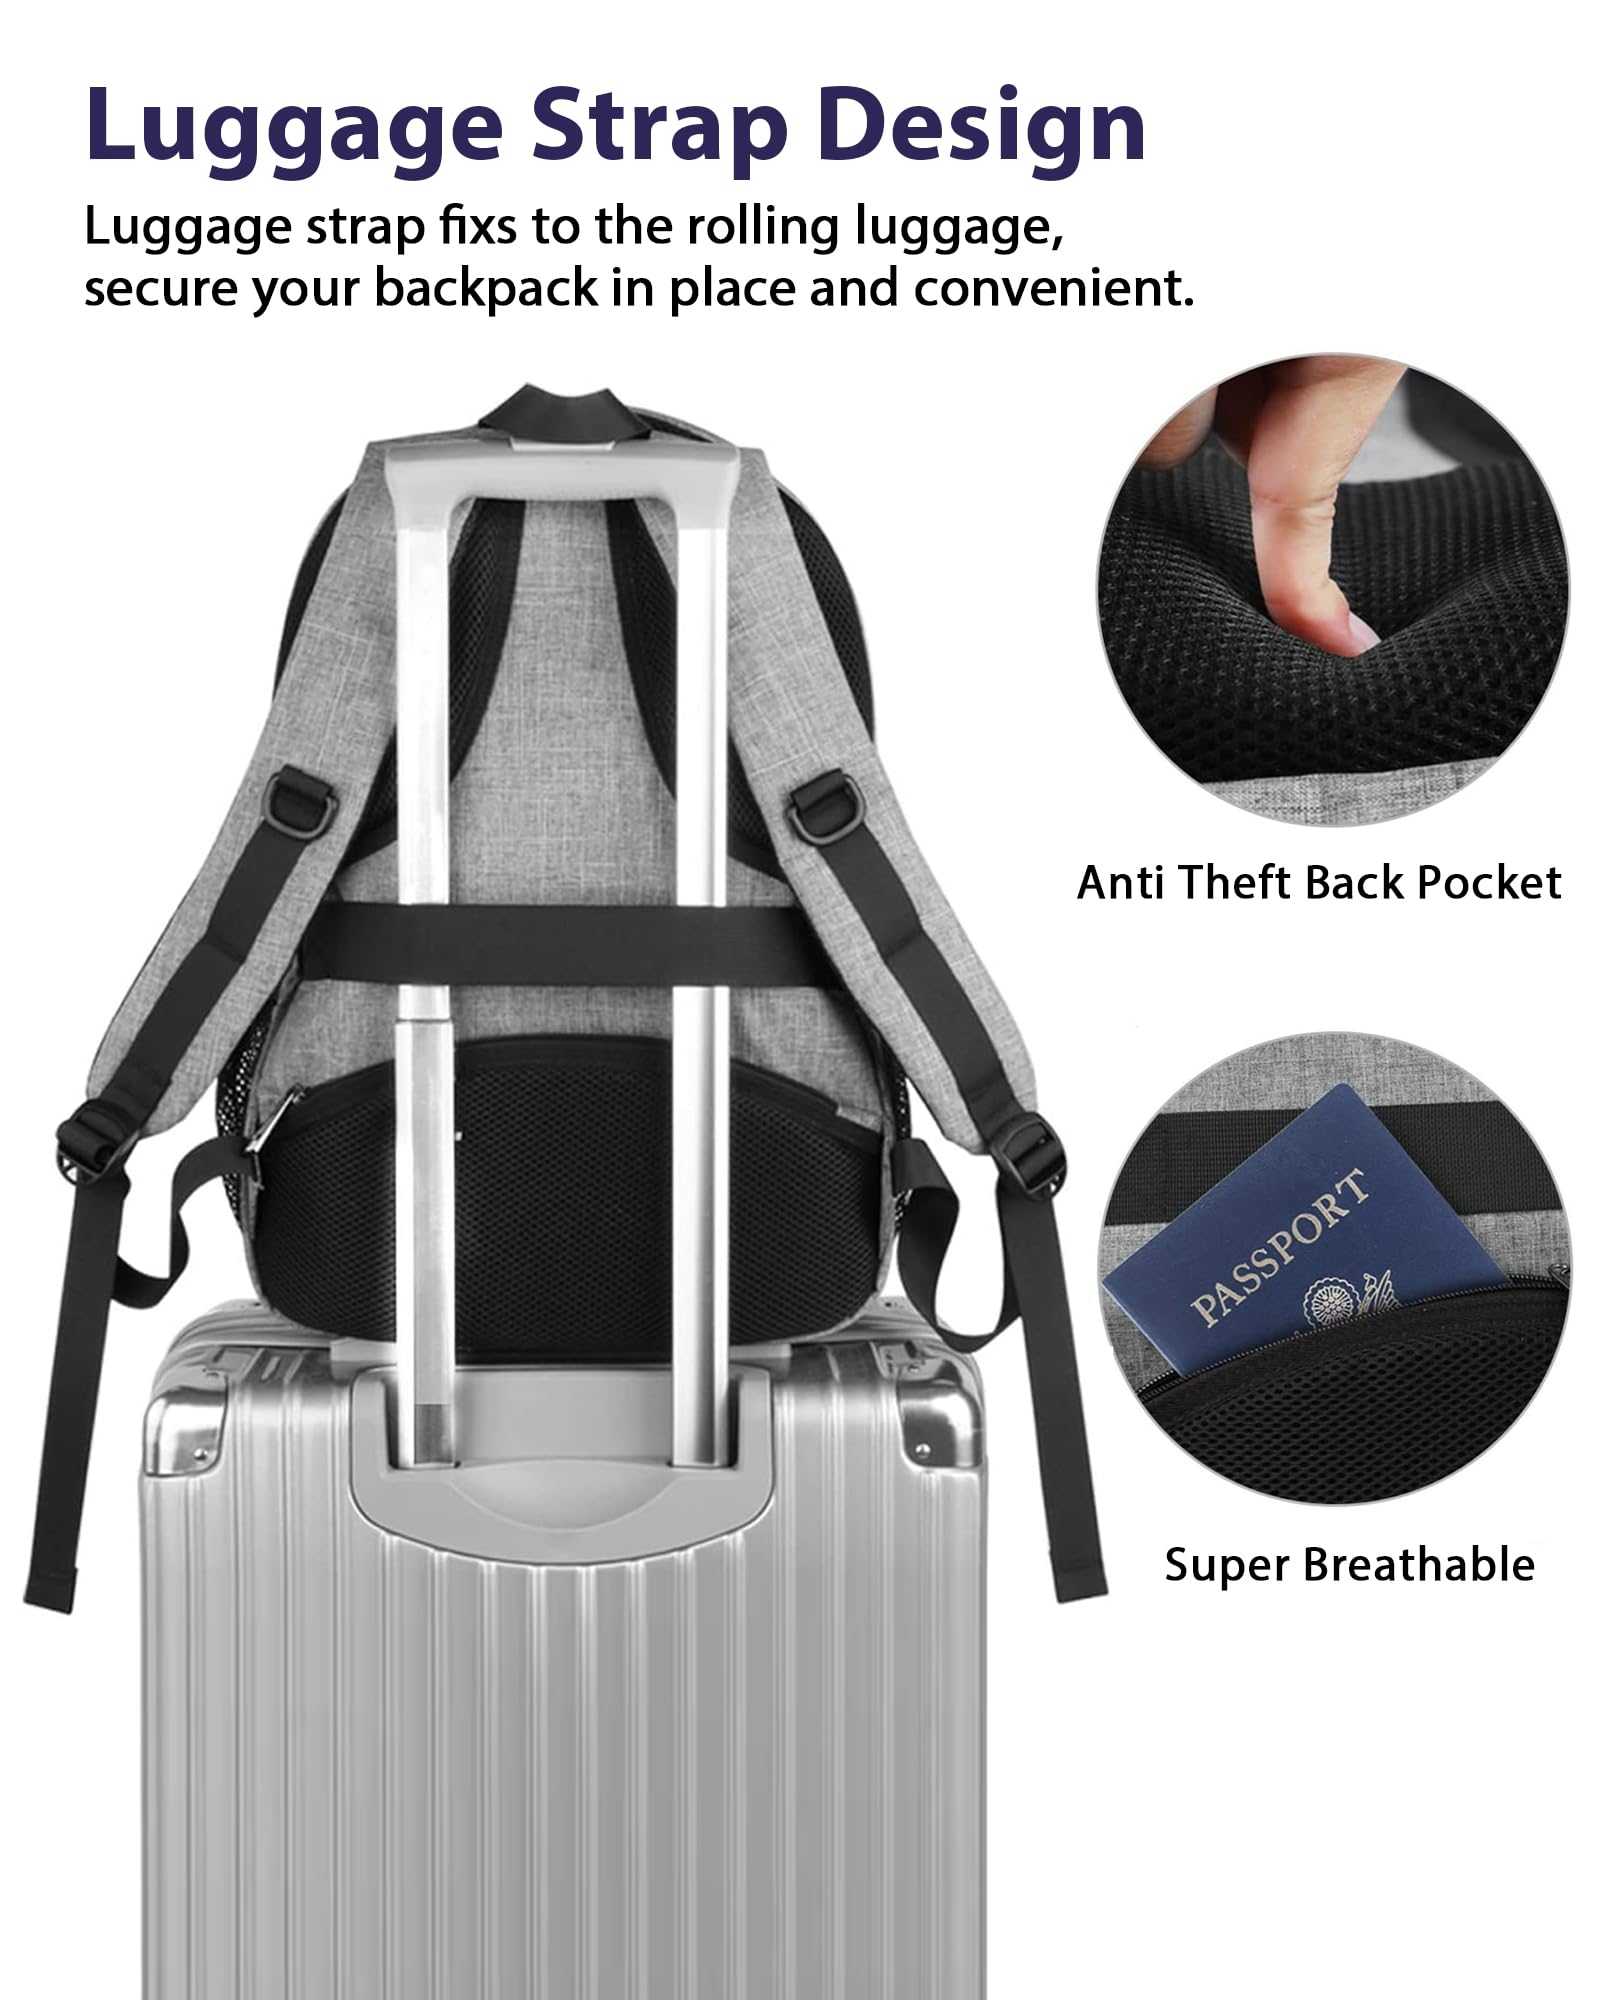 17 Inch Travel Laptop Backpack